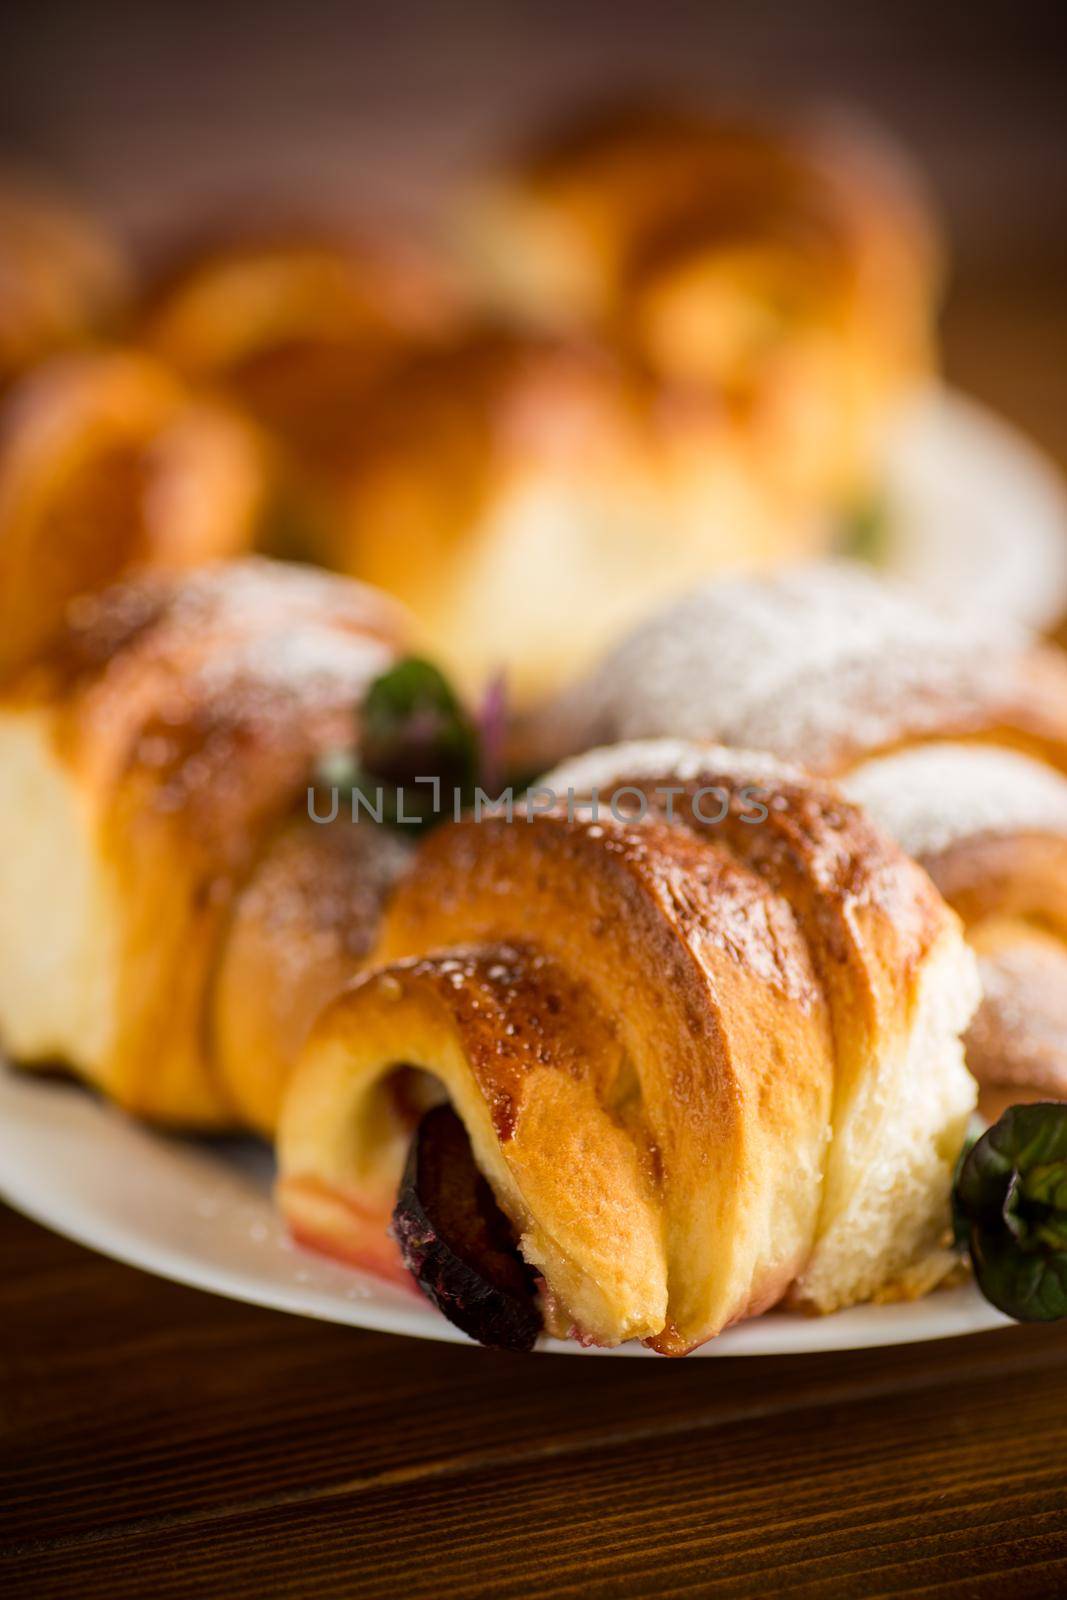 baked sweet homemade buns with plum inside, on a wooden table.